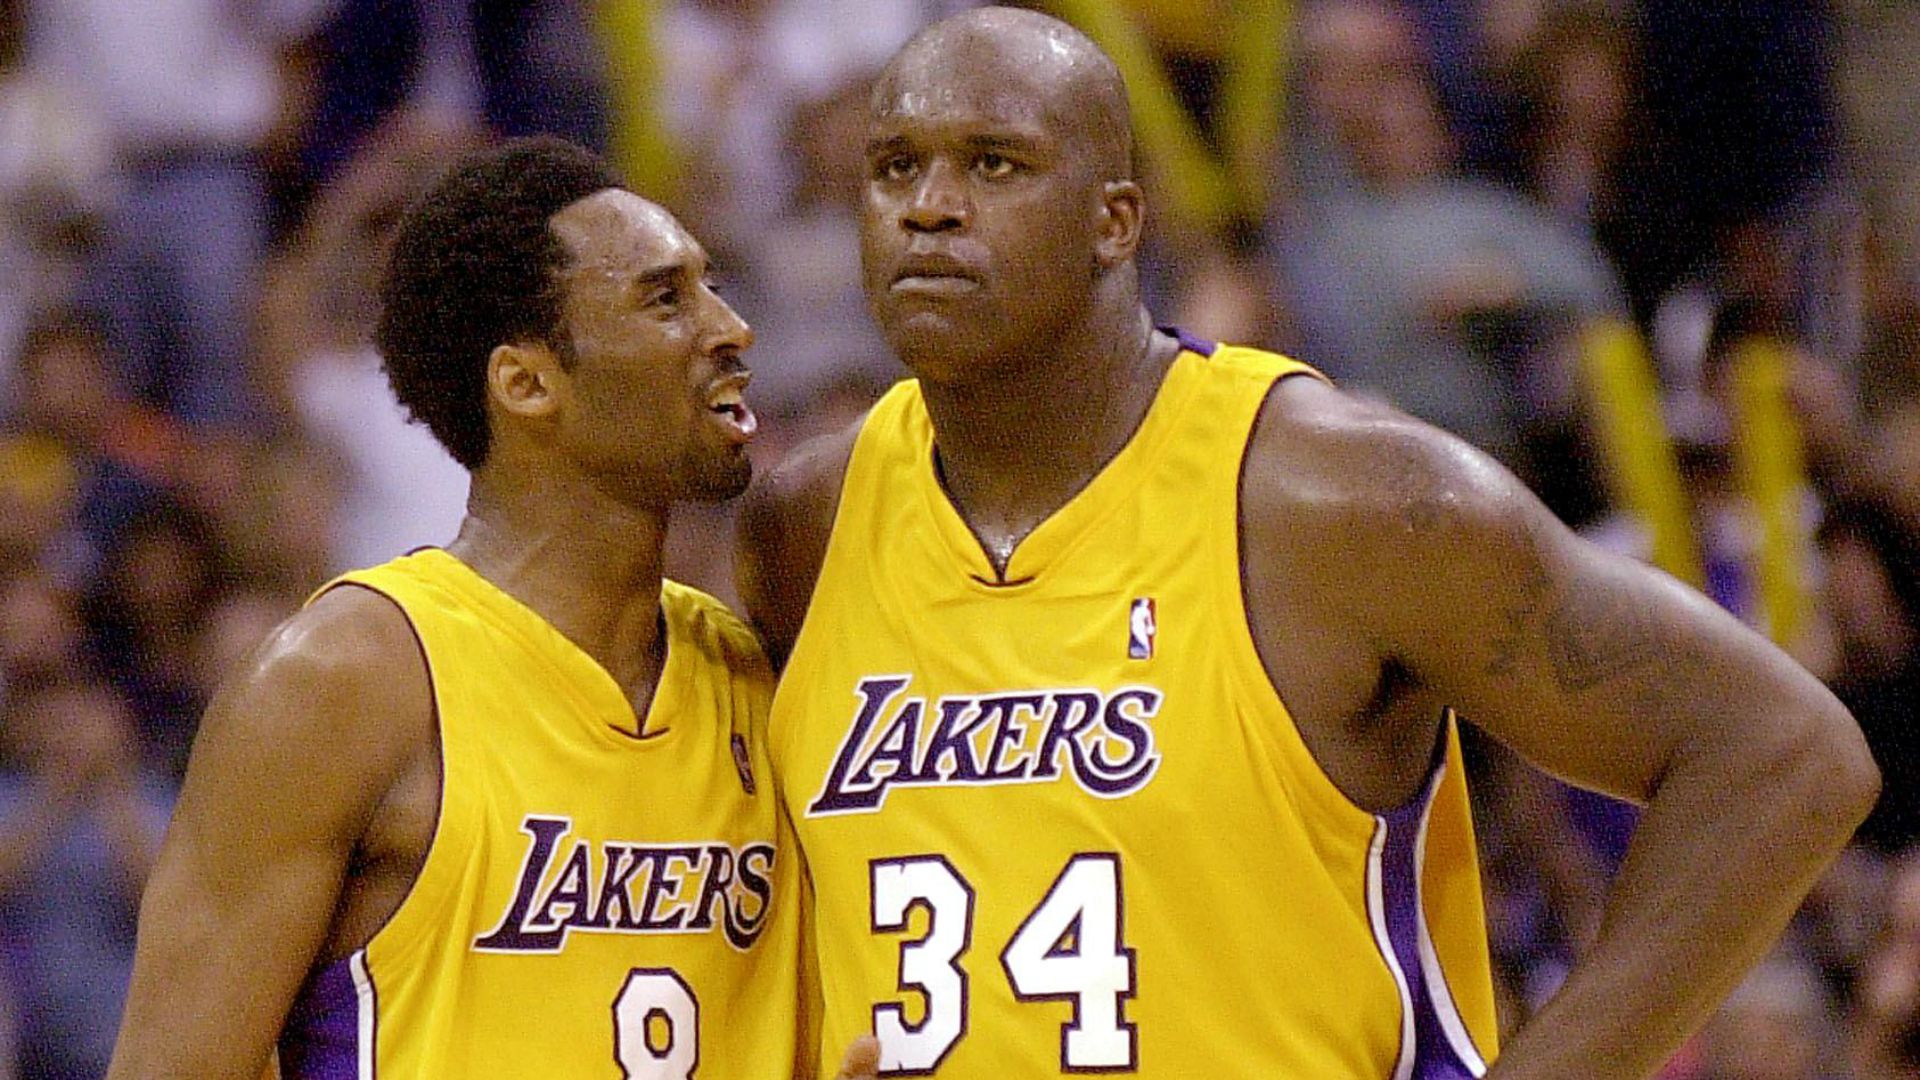 The 5 best moments from Kobe and Shaq's TNT interview